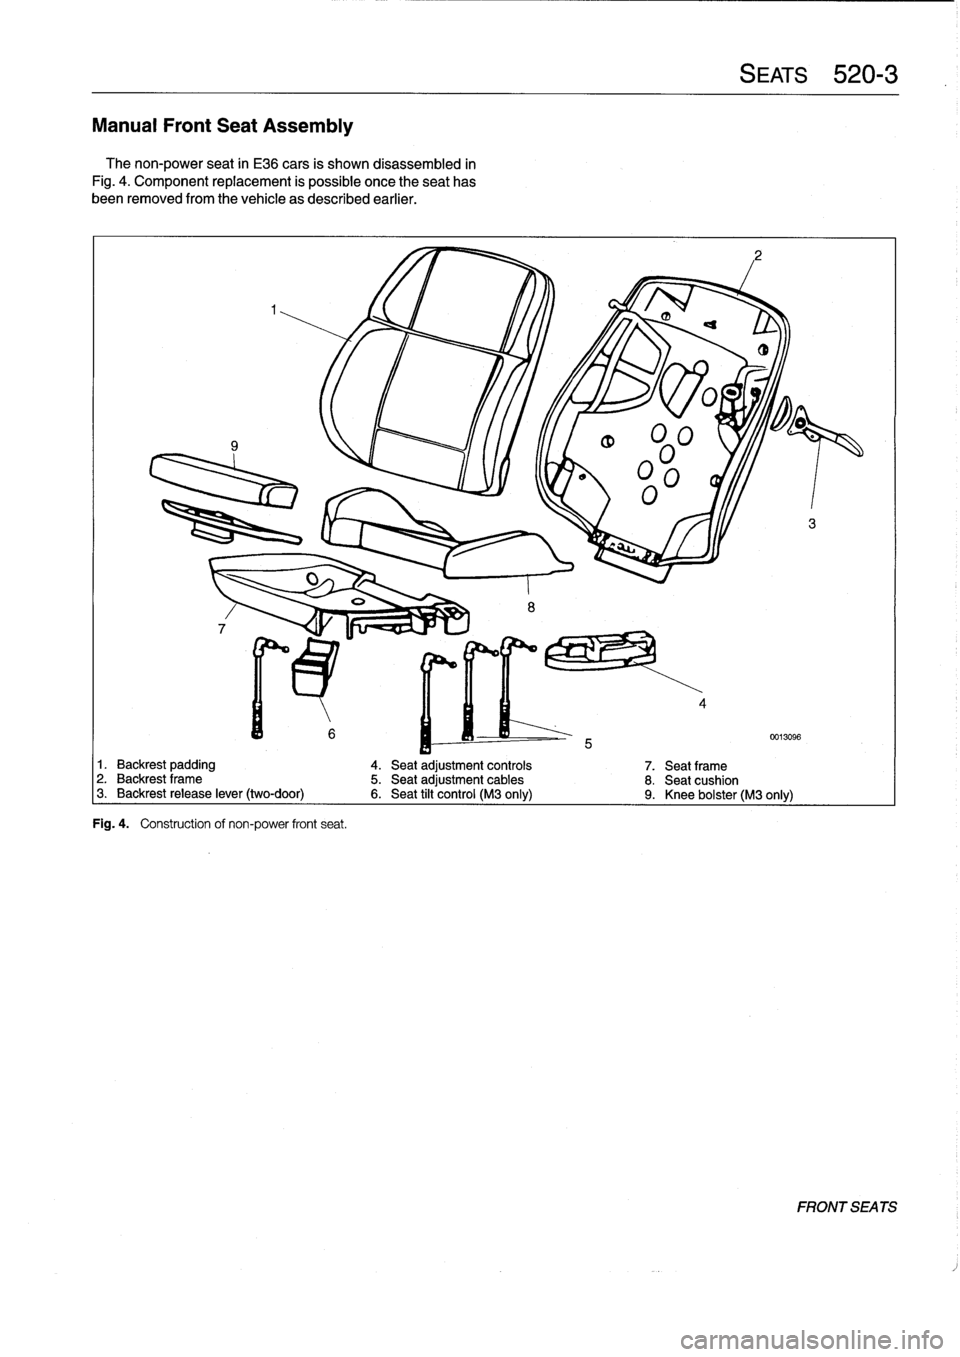 BMW 318i 1998 E36 Workshop Manual 
Manual
Front
Seat
Assembly

The
non-power
seat
in
E36
cars
is
shown
disassembled
in

Fig
.
4
.
Component
replacement
is
possible
once
theseat
has

been
removed
from
the
vehicle
as
described
earlier
.